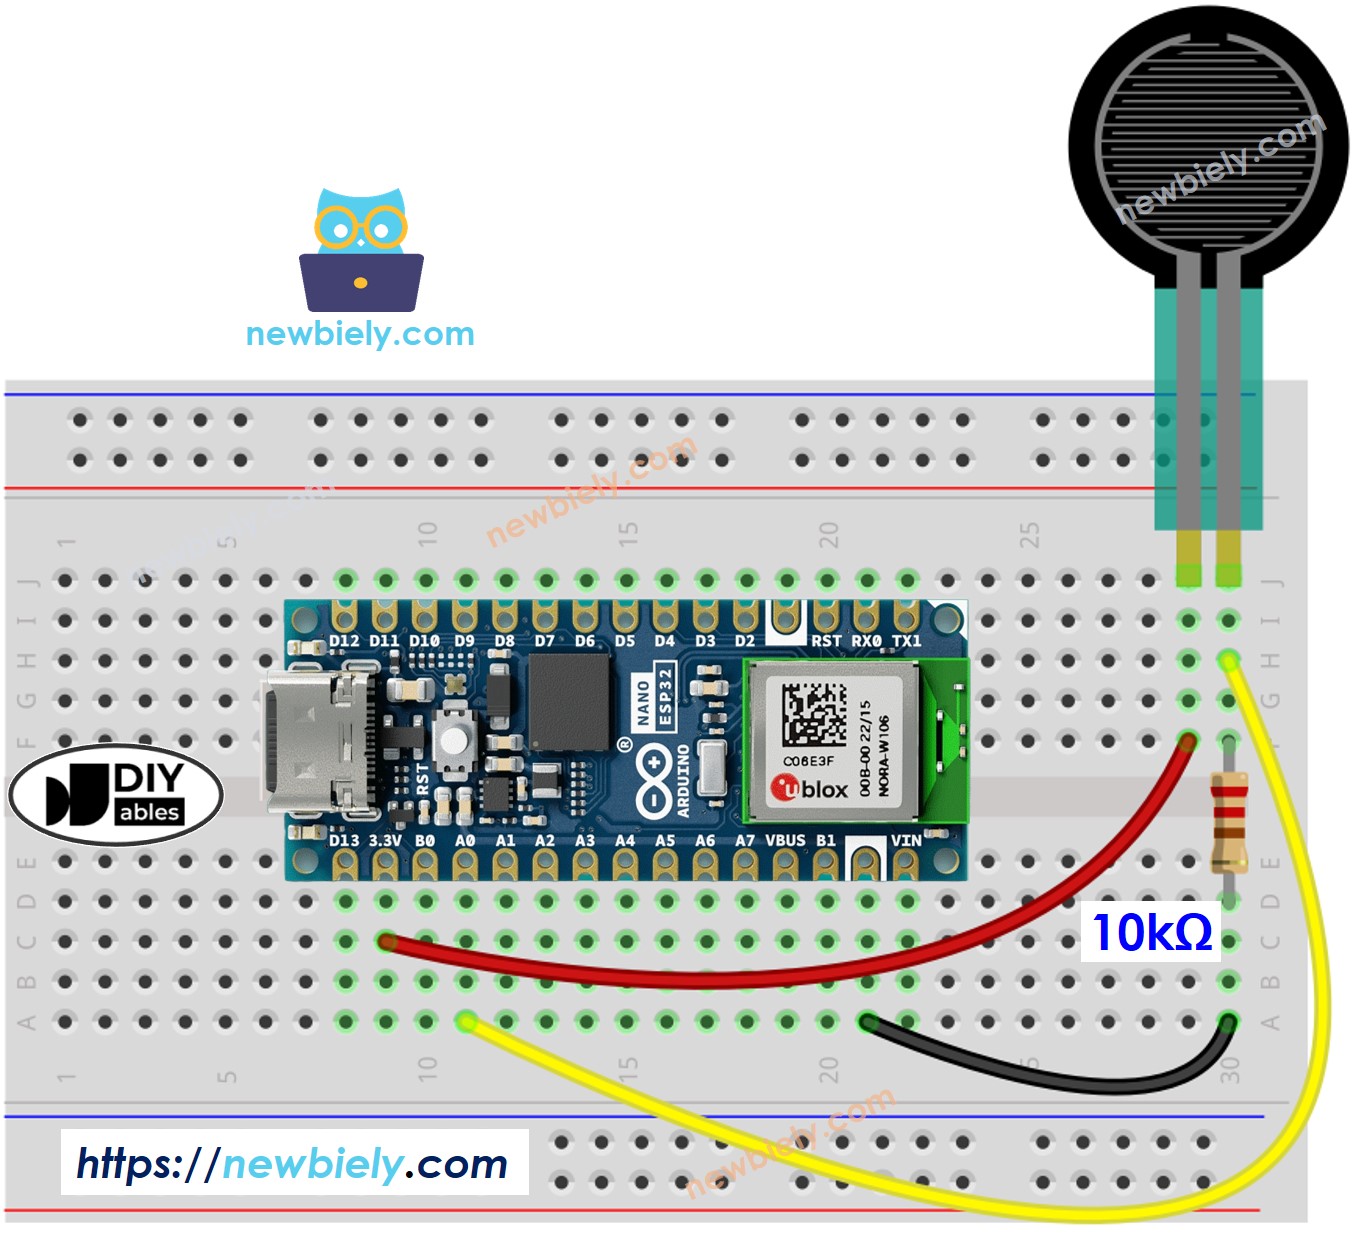 The wiring diagram between Arduino Nano ESP32 and Force